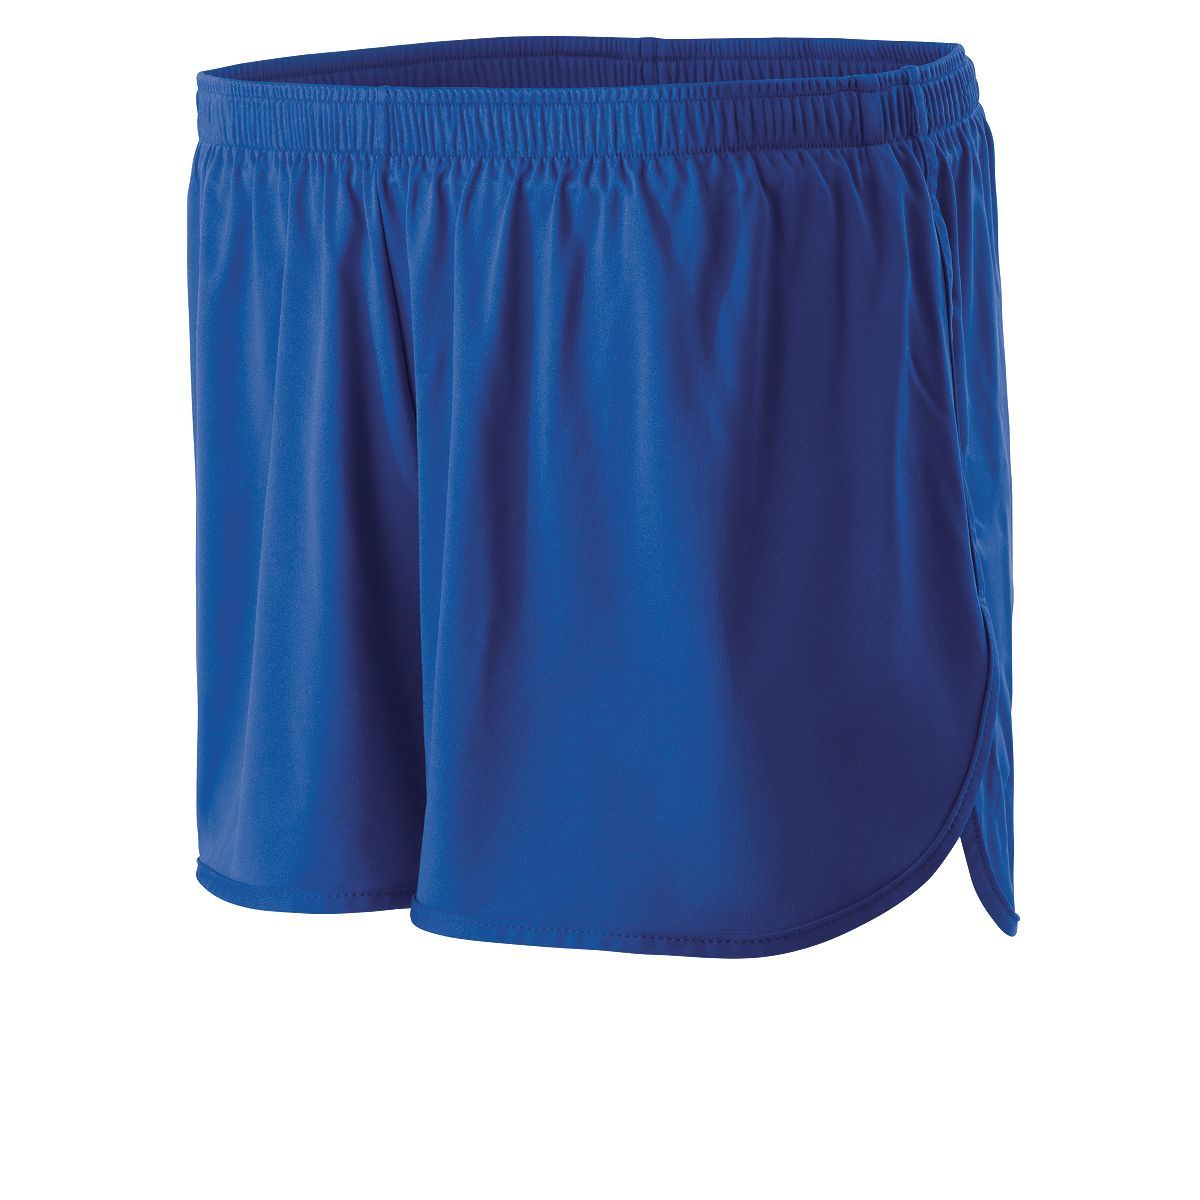 Holloway Anchor Shorts in Royal  -Part of the Adult, Adult-Shorts, Track-Field, Holloway product lines at KanaleyCreations.com